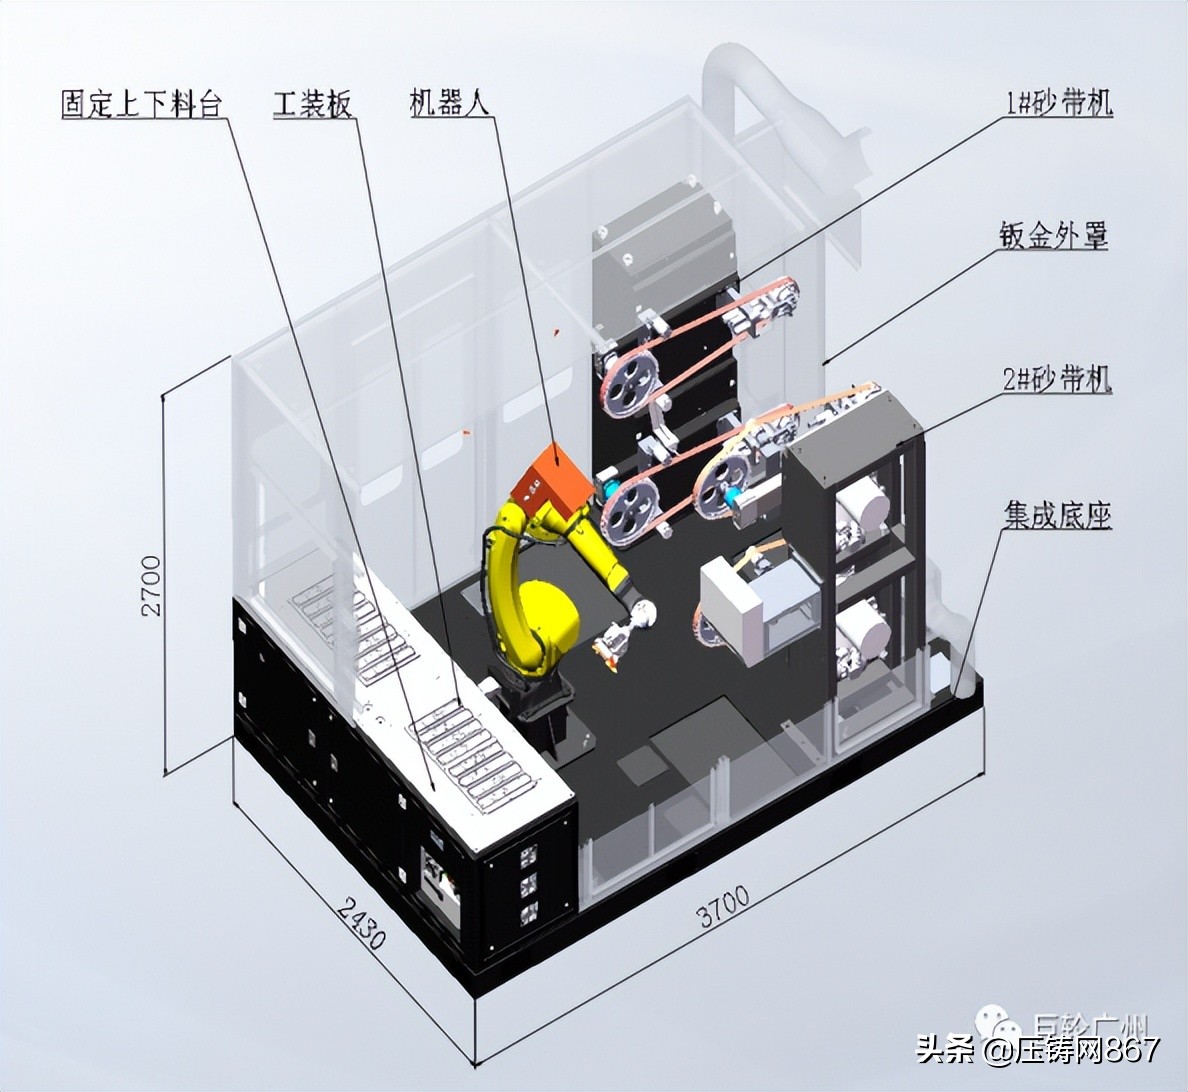  Providing customers with robot polishing and polishing manufacturing services - Julun (Guangzhou) intelligent equipment